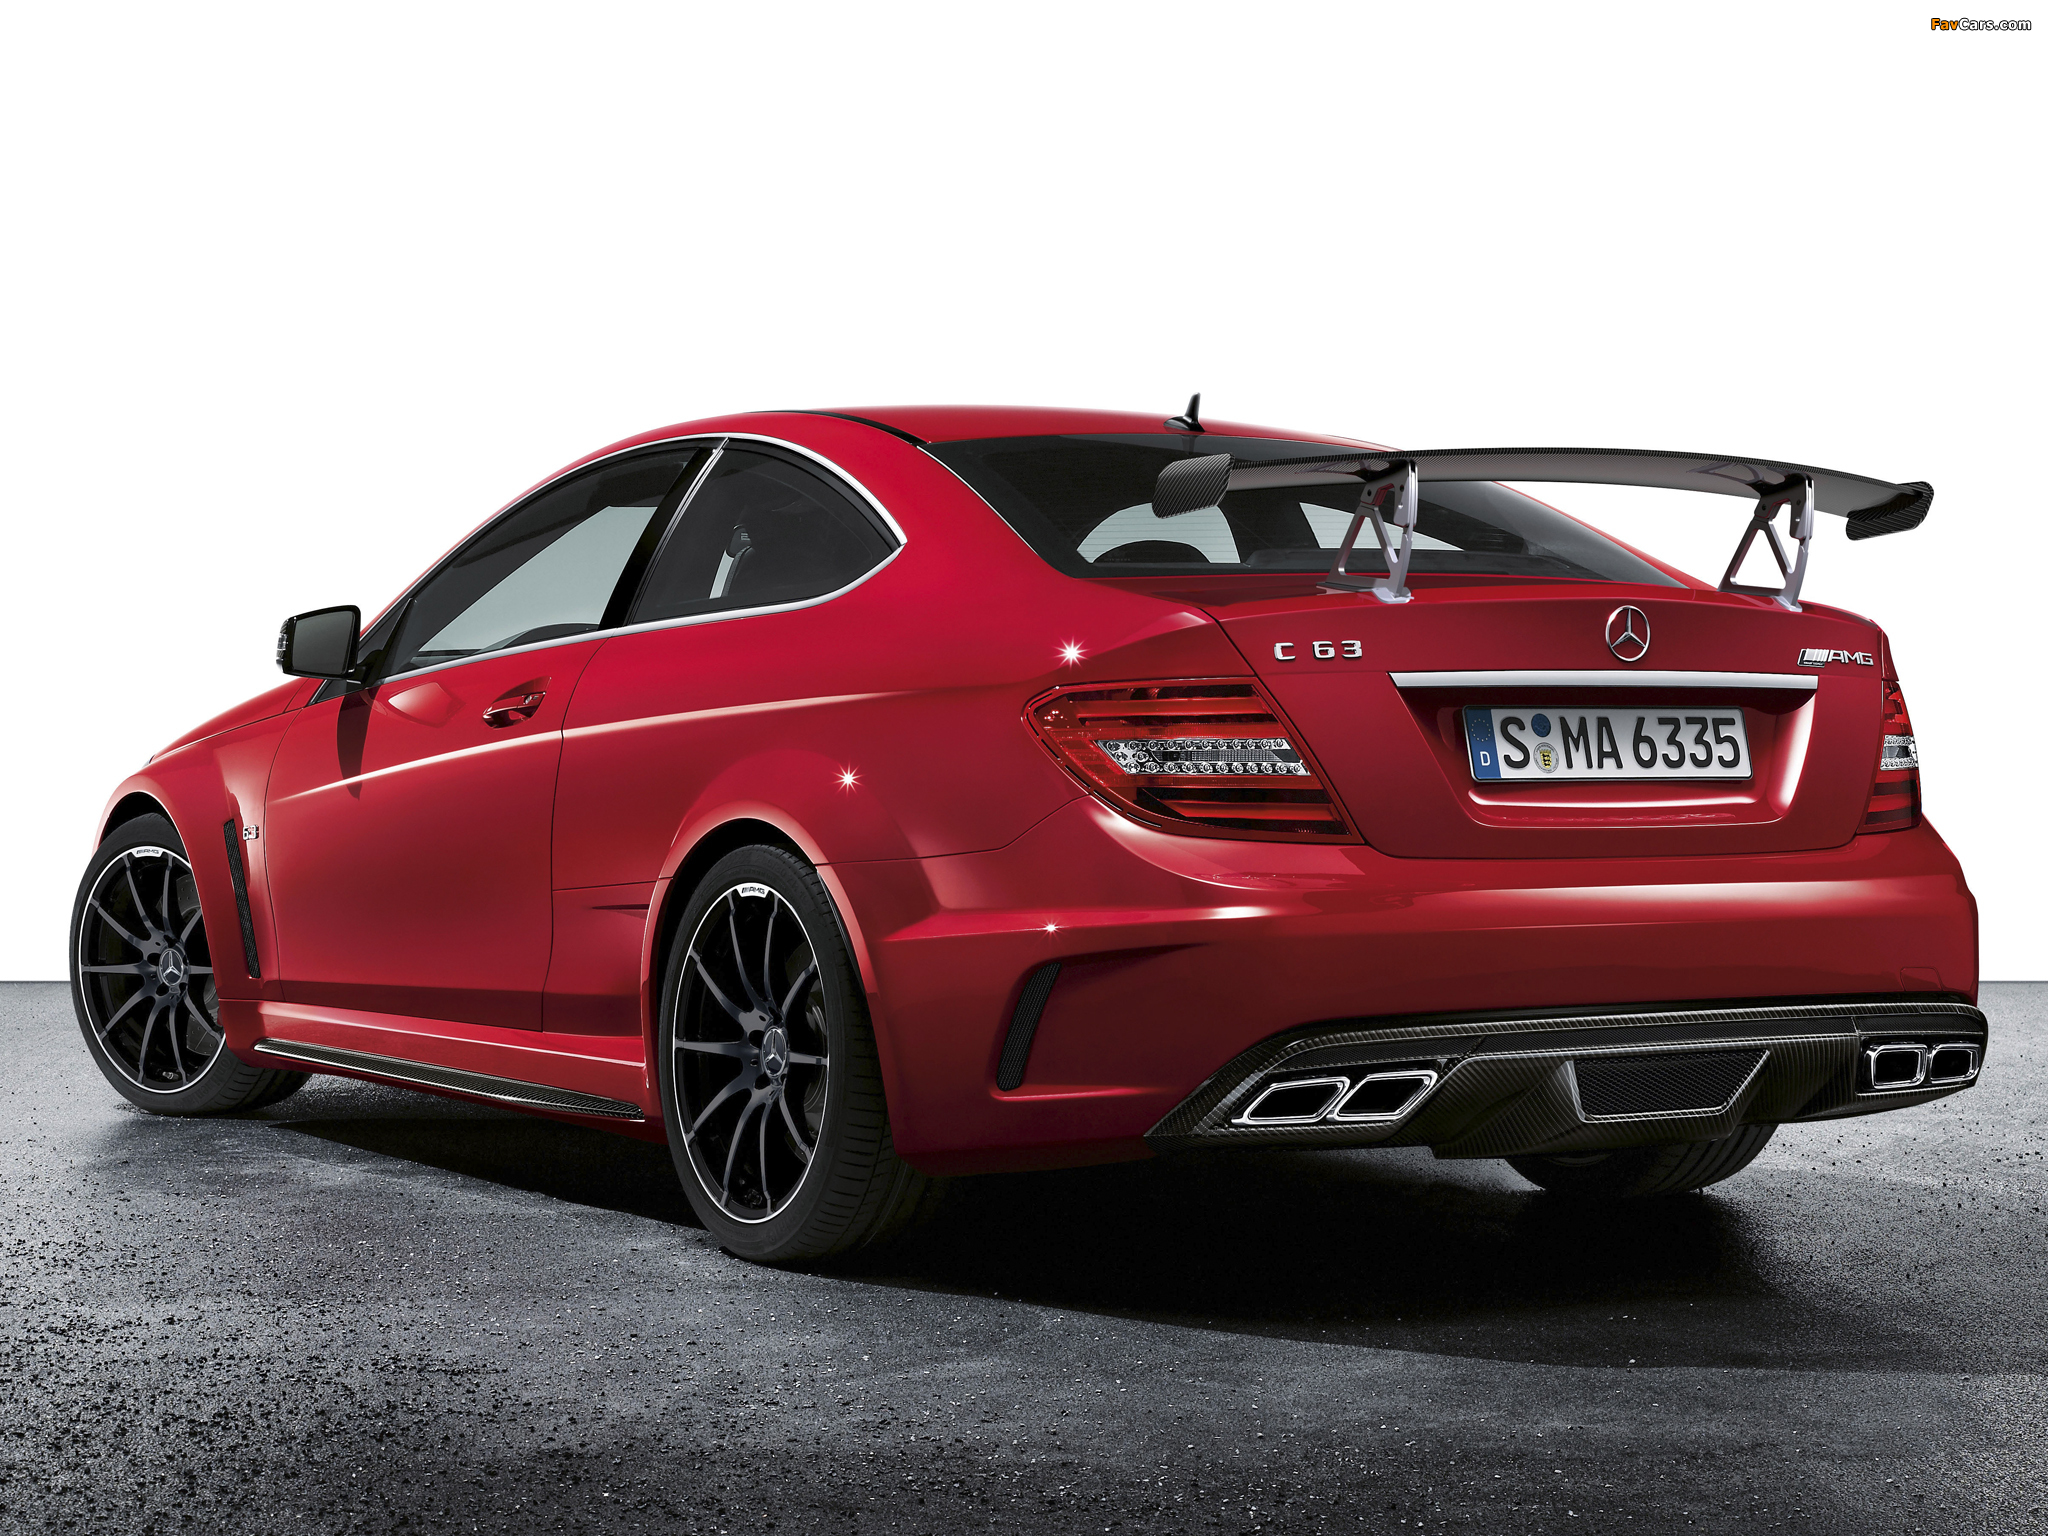 Mercedes-Benz C 63 AMG Black Series Coupe (C204) 2011 pictures (2048 x 1536)